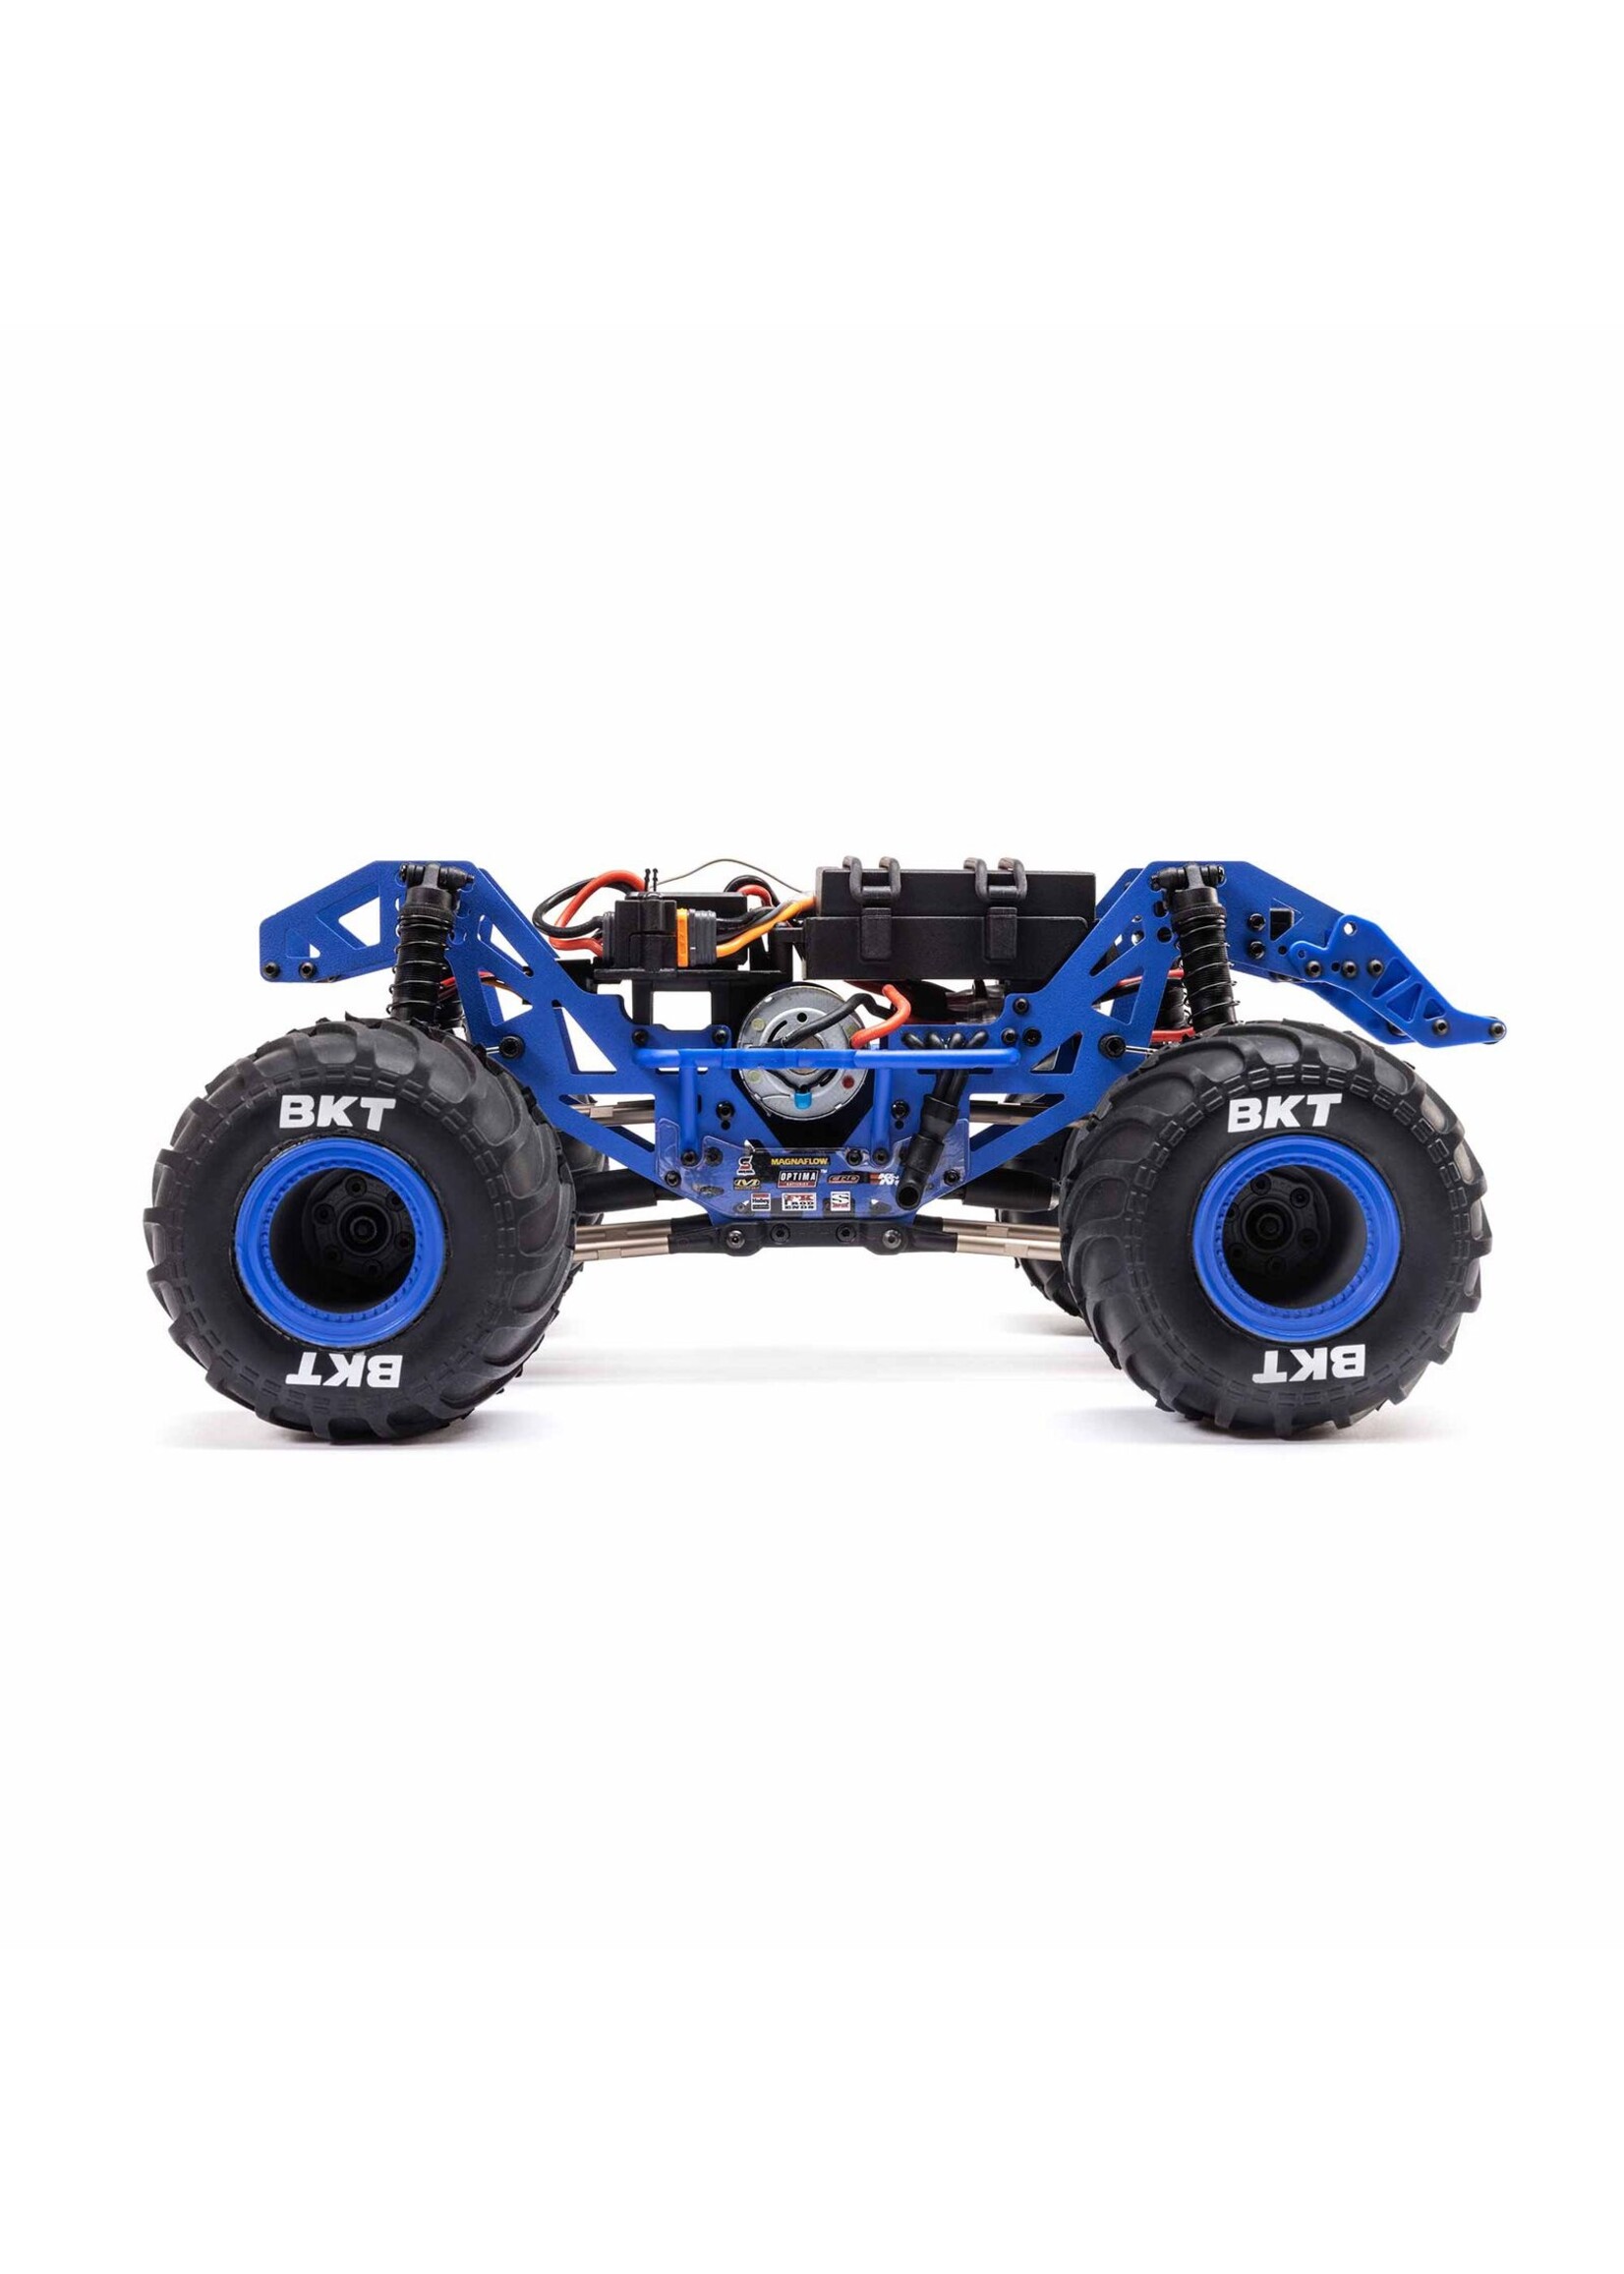 Losi LOS01026T2 - Mini LMT 4WD Brushed RTR Monster Truck Son-Uva Digger